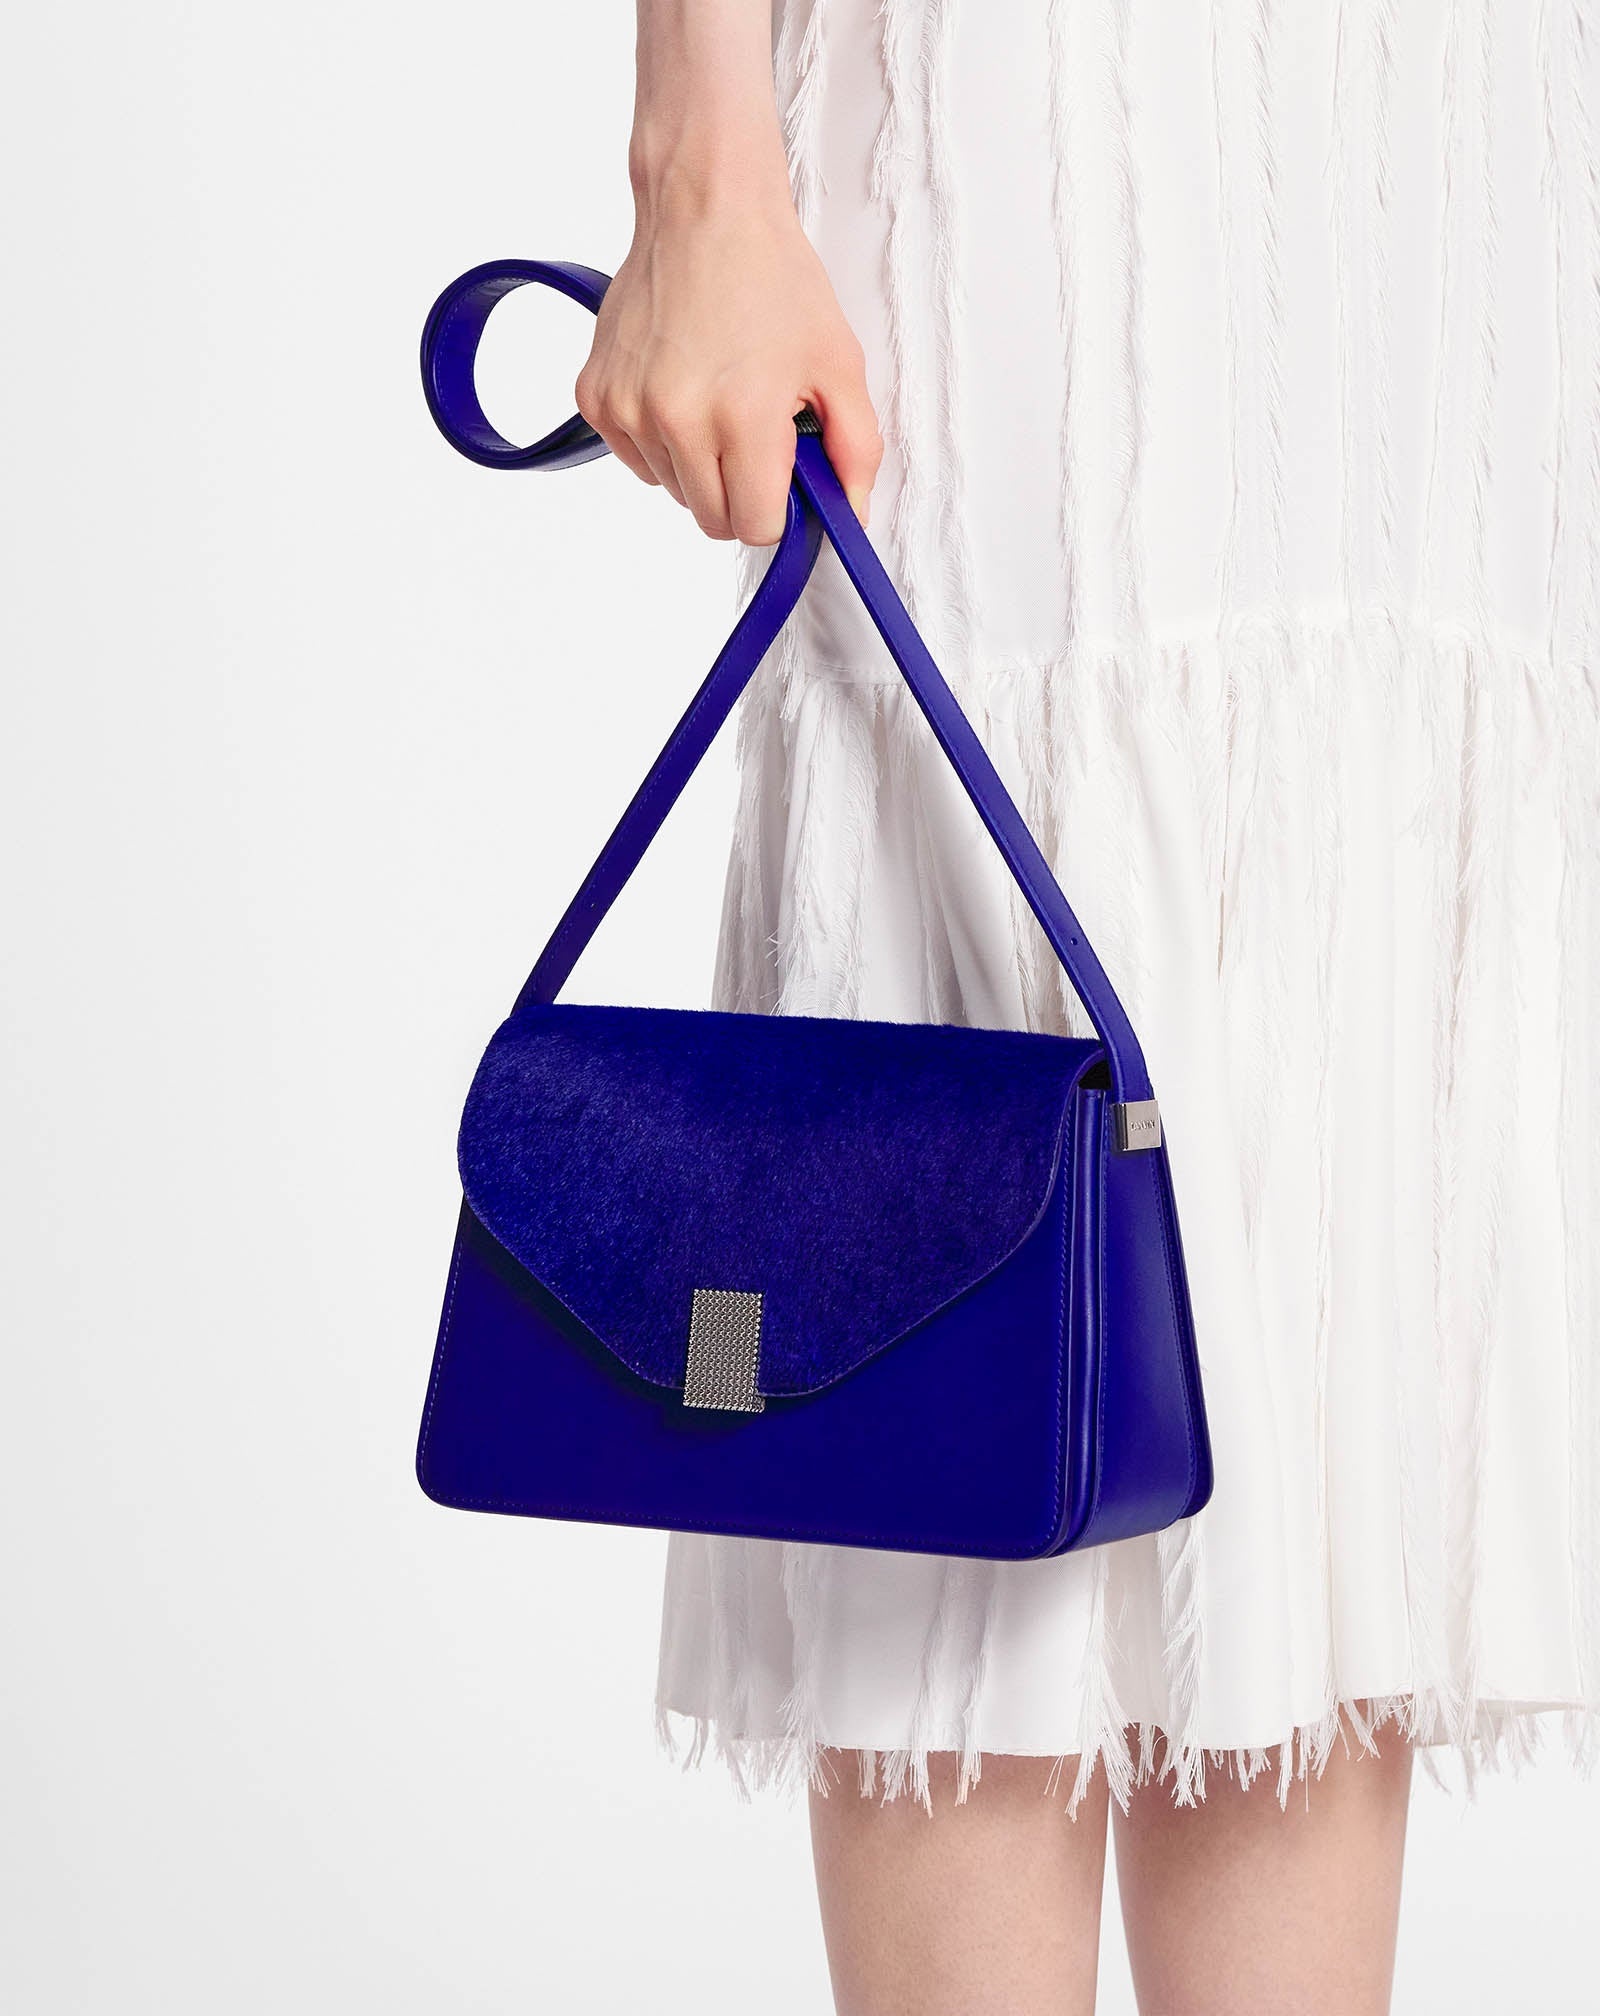 PM CONCERTO BAG IN PONY EFFECT LEATHER - 2